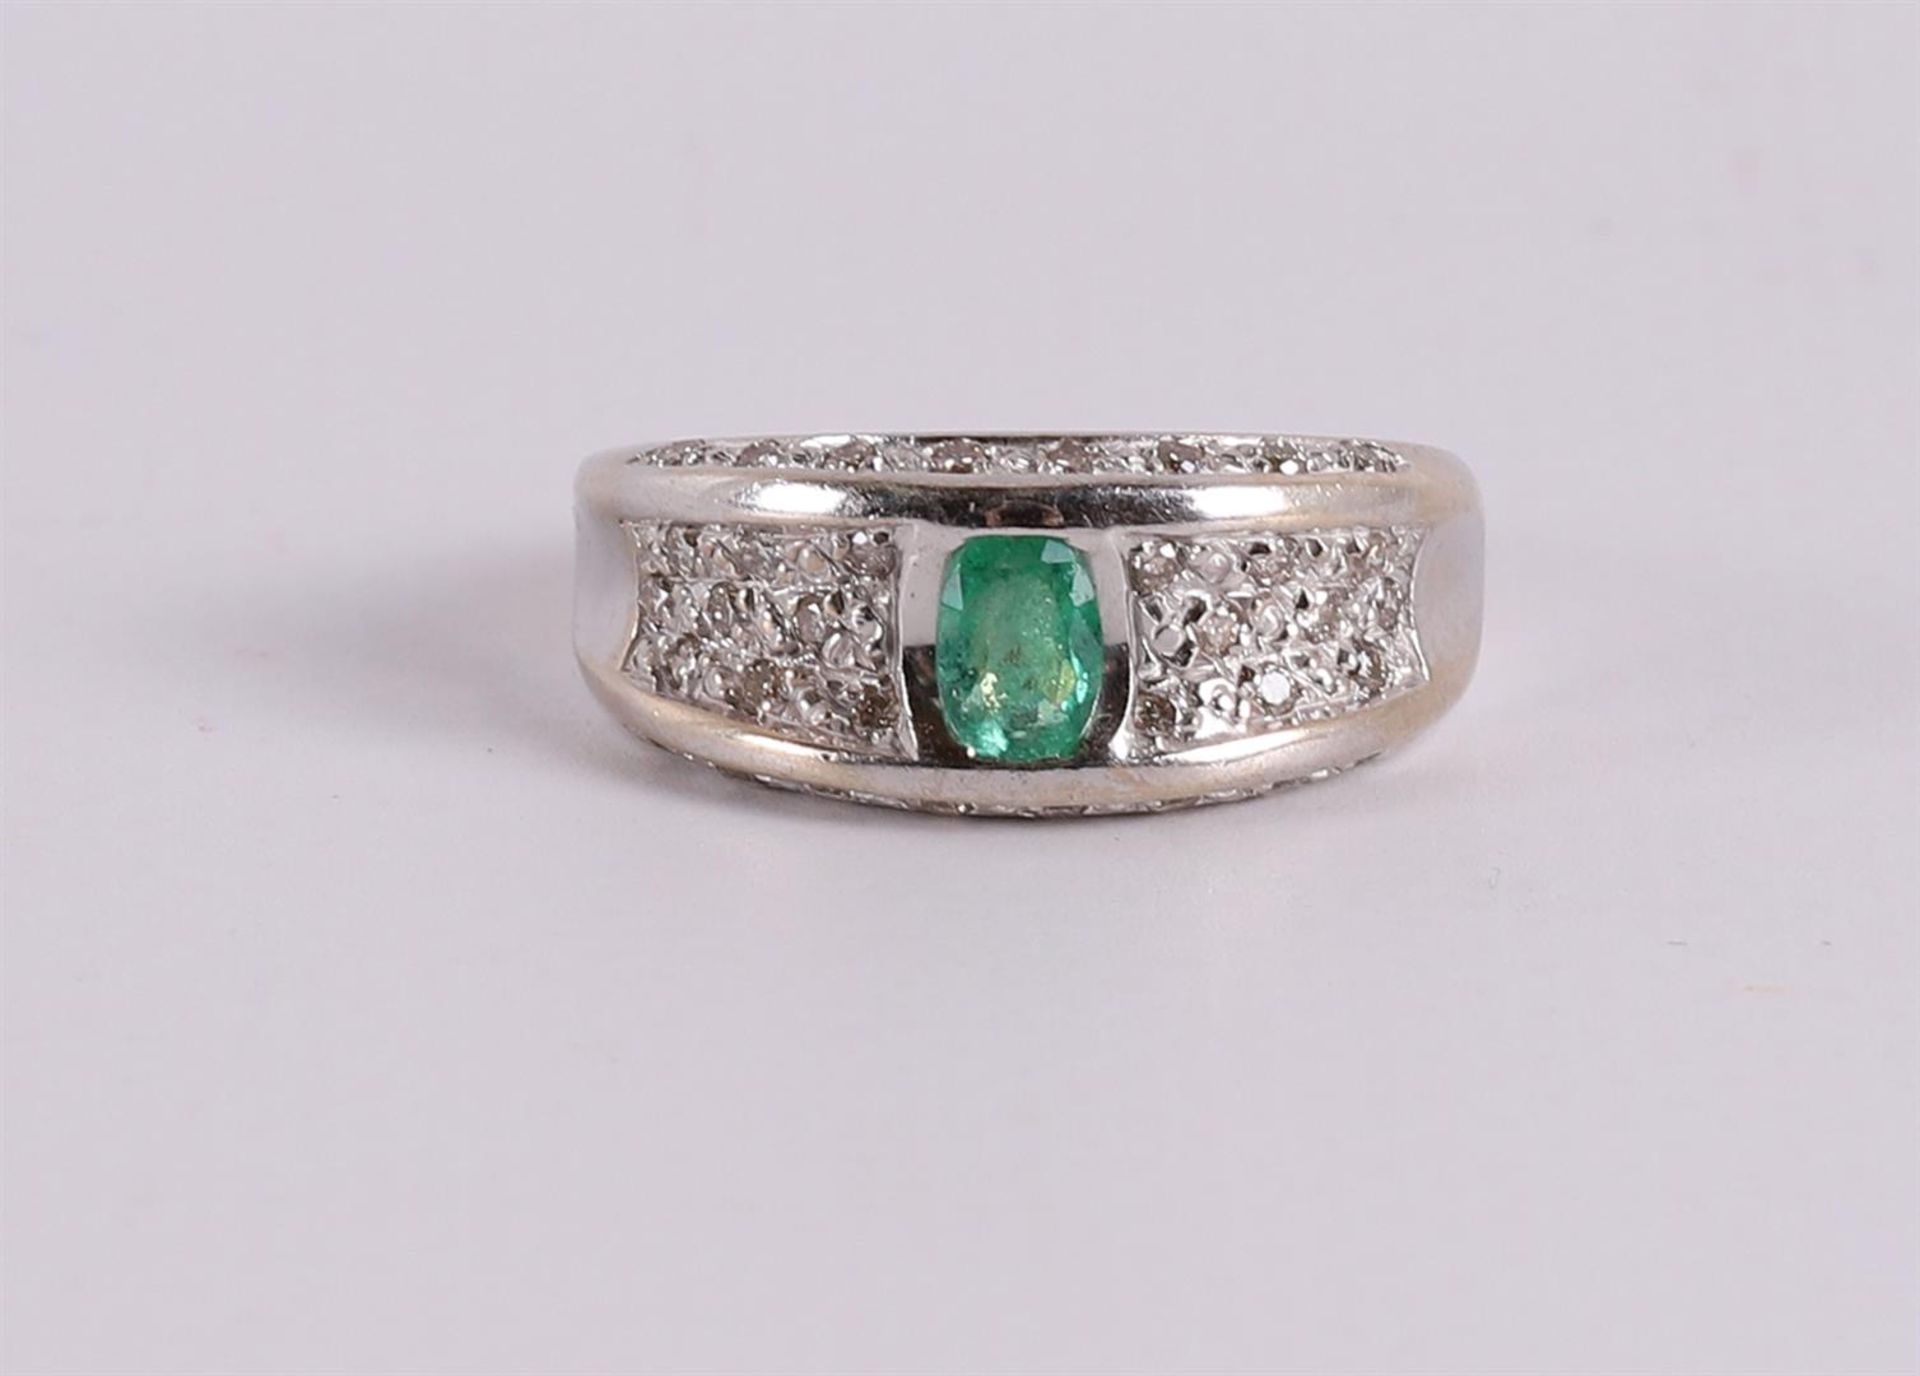 An 18 kt gold band ring with an oval facet cut emerald